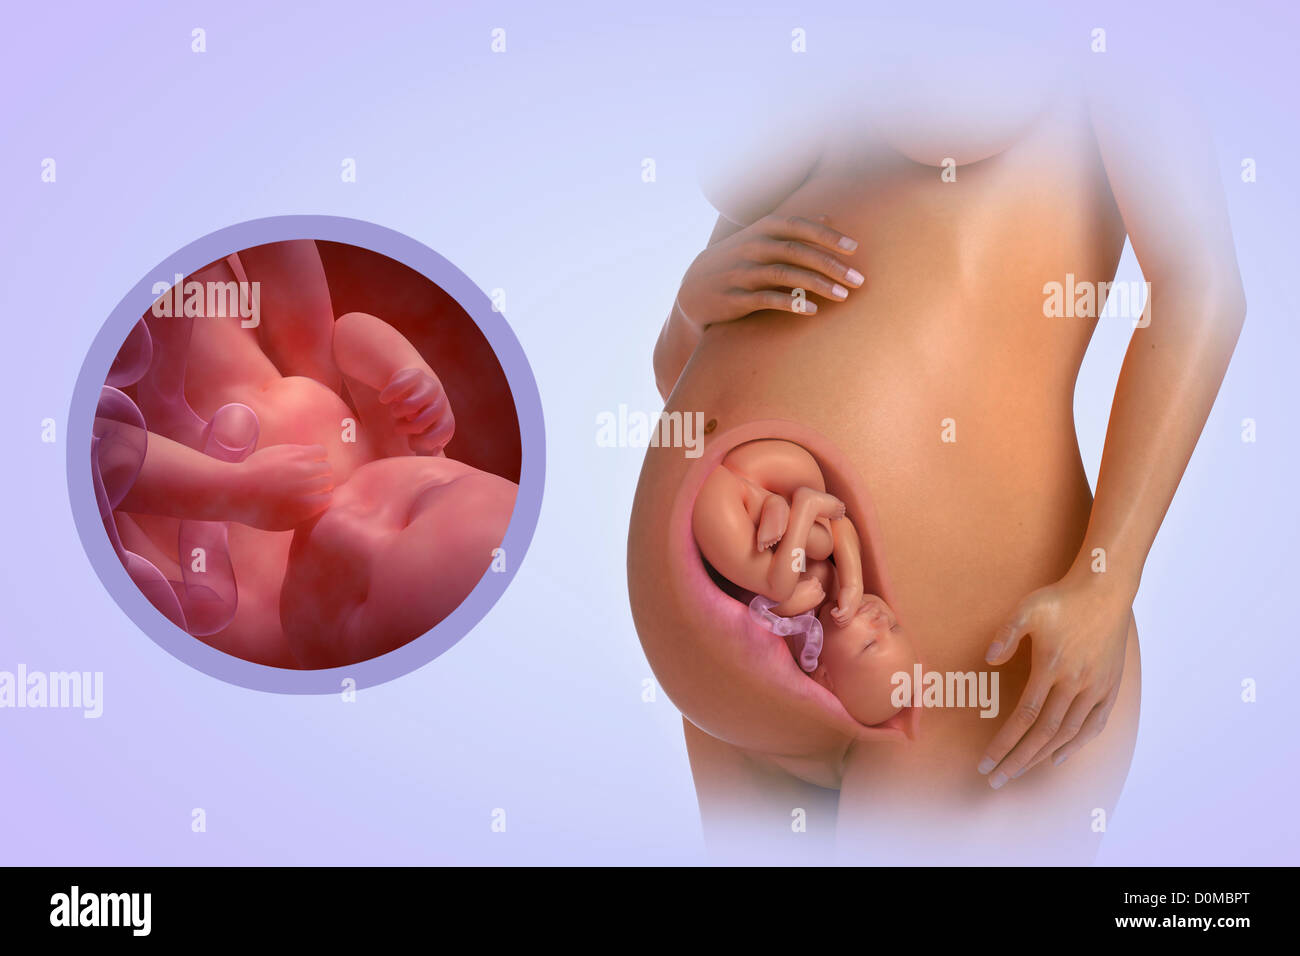 A human model showing pregnancy at week 37. Stock Photo